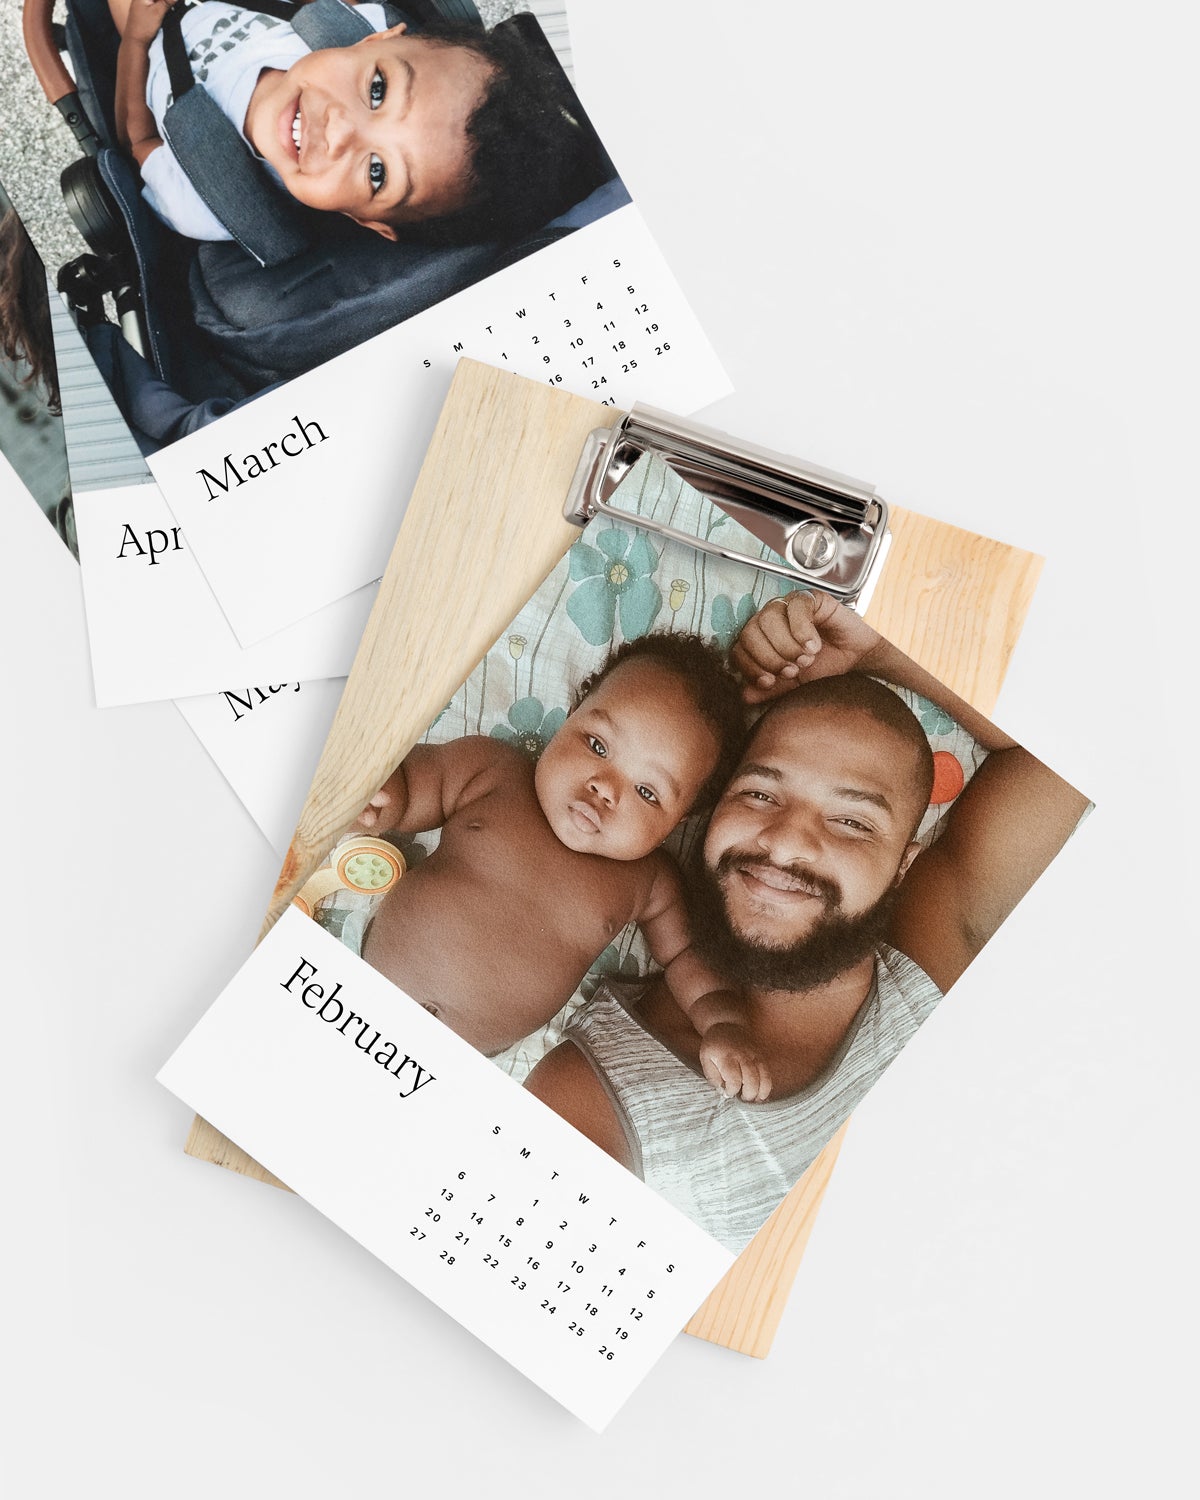 Desktop calendar featuring photo of father and baby laying down